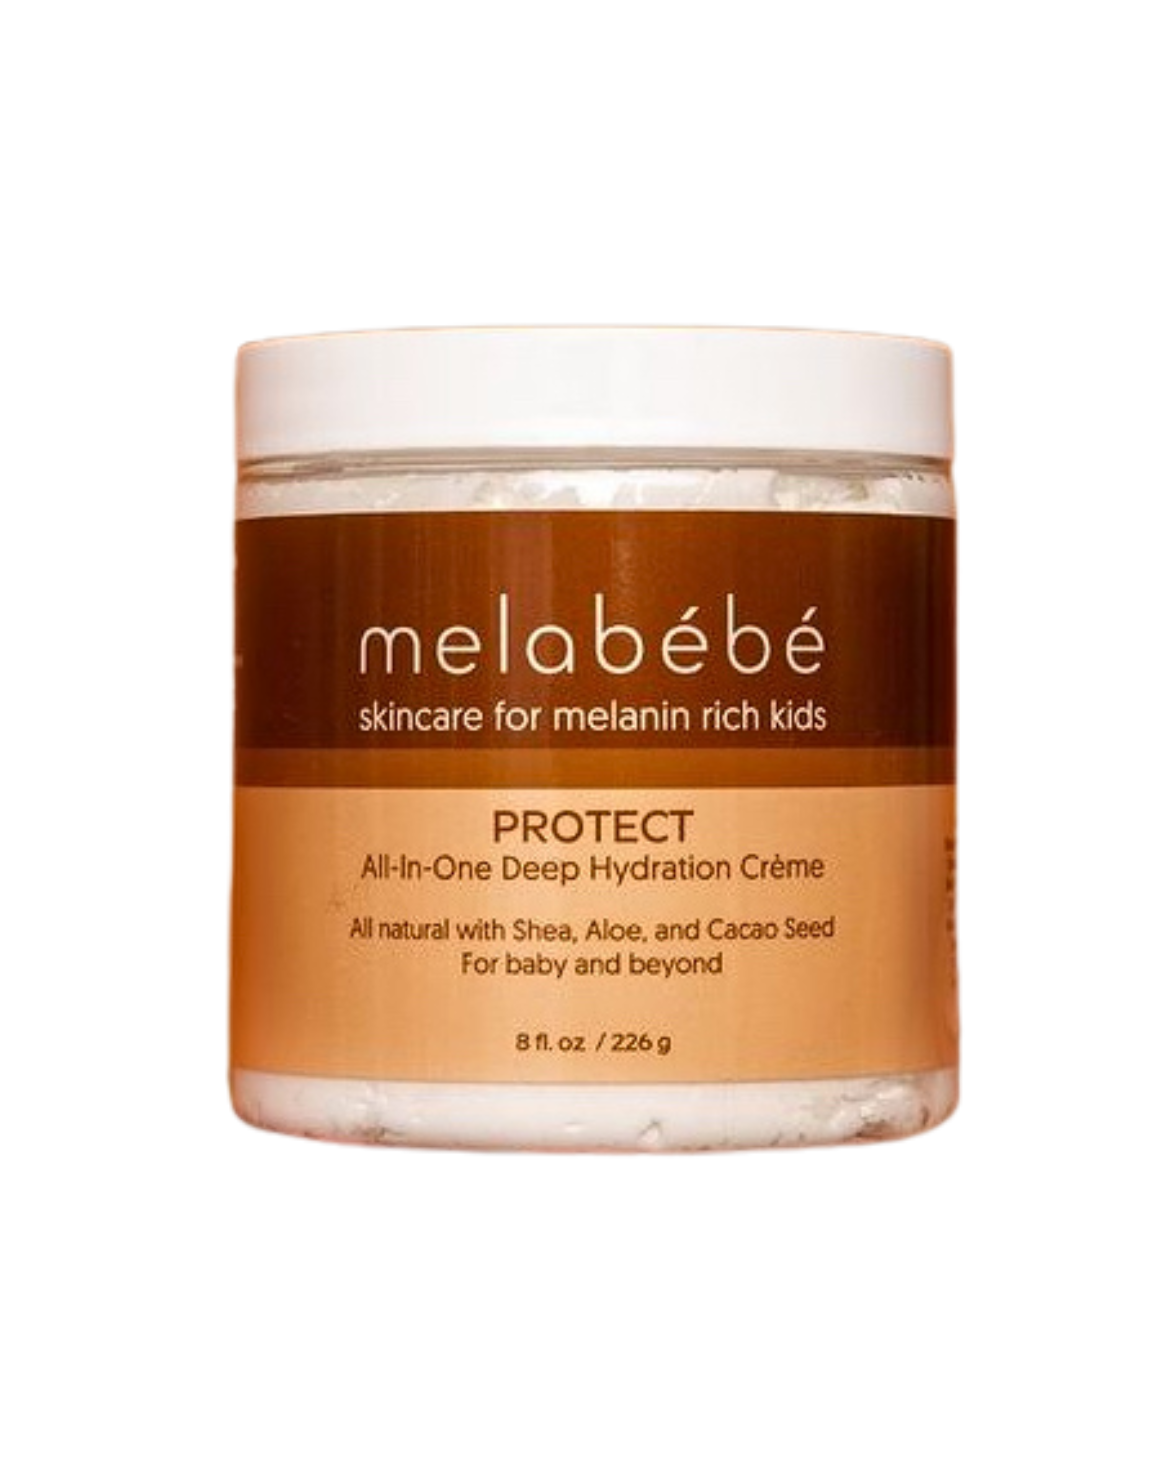 Protect: All-in-One Moisture and Hydration Crème